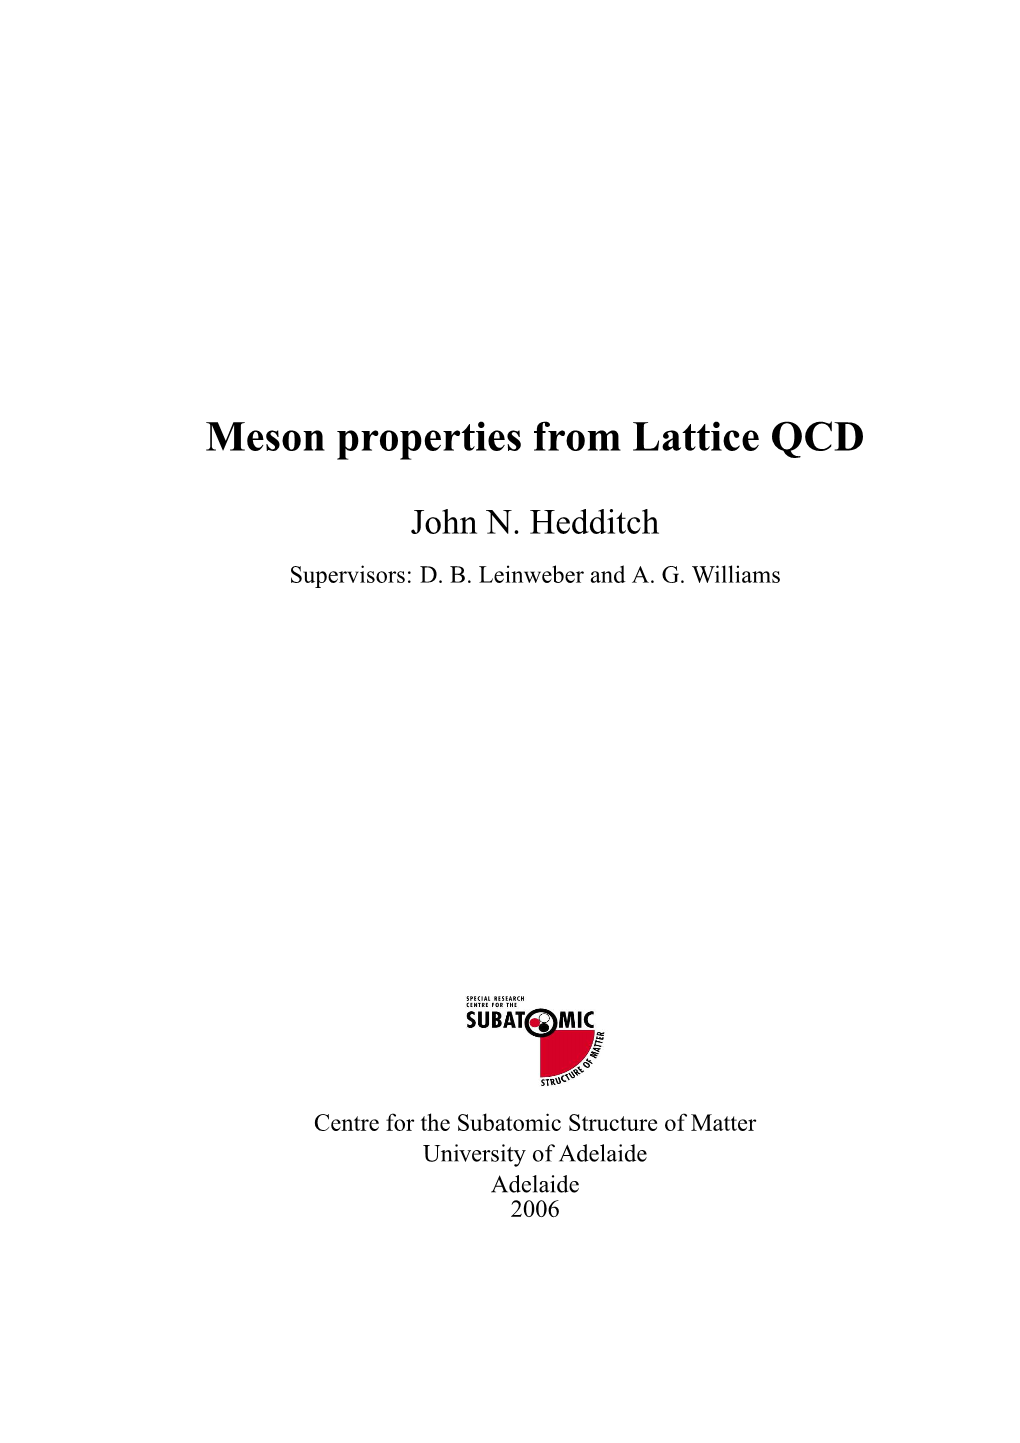 Meson Properties from Lattice QCD